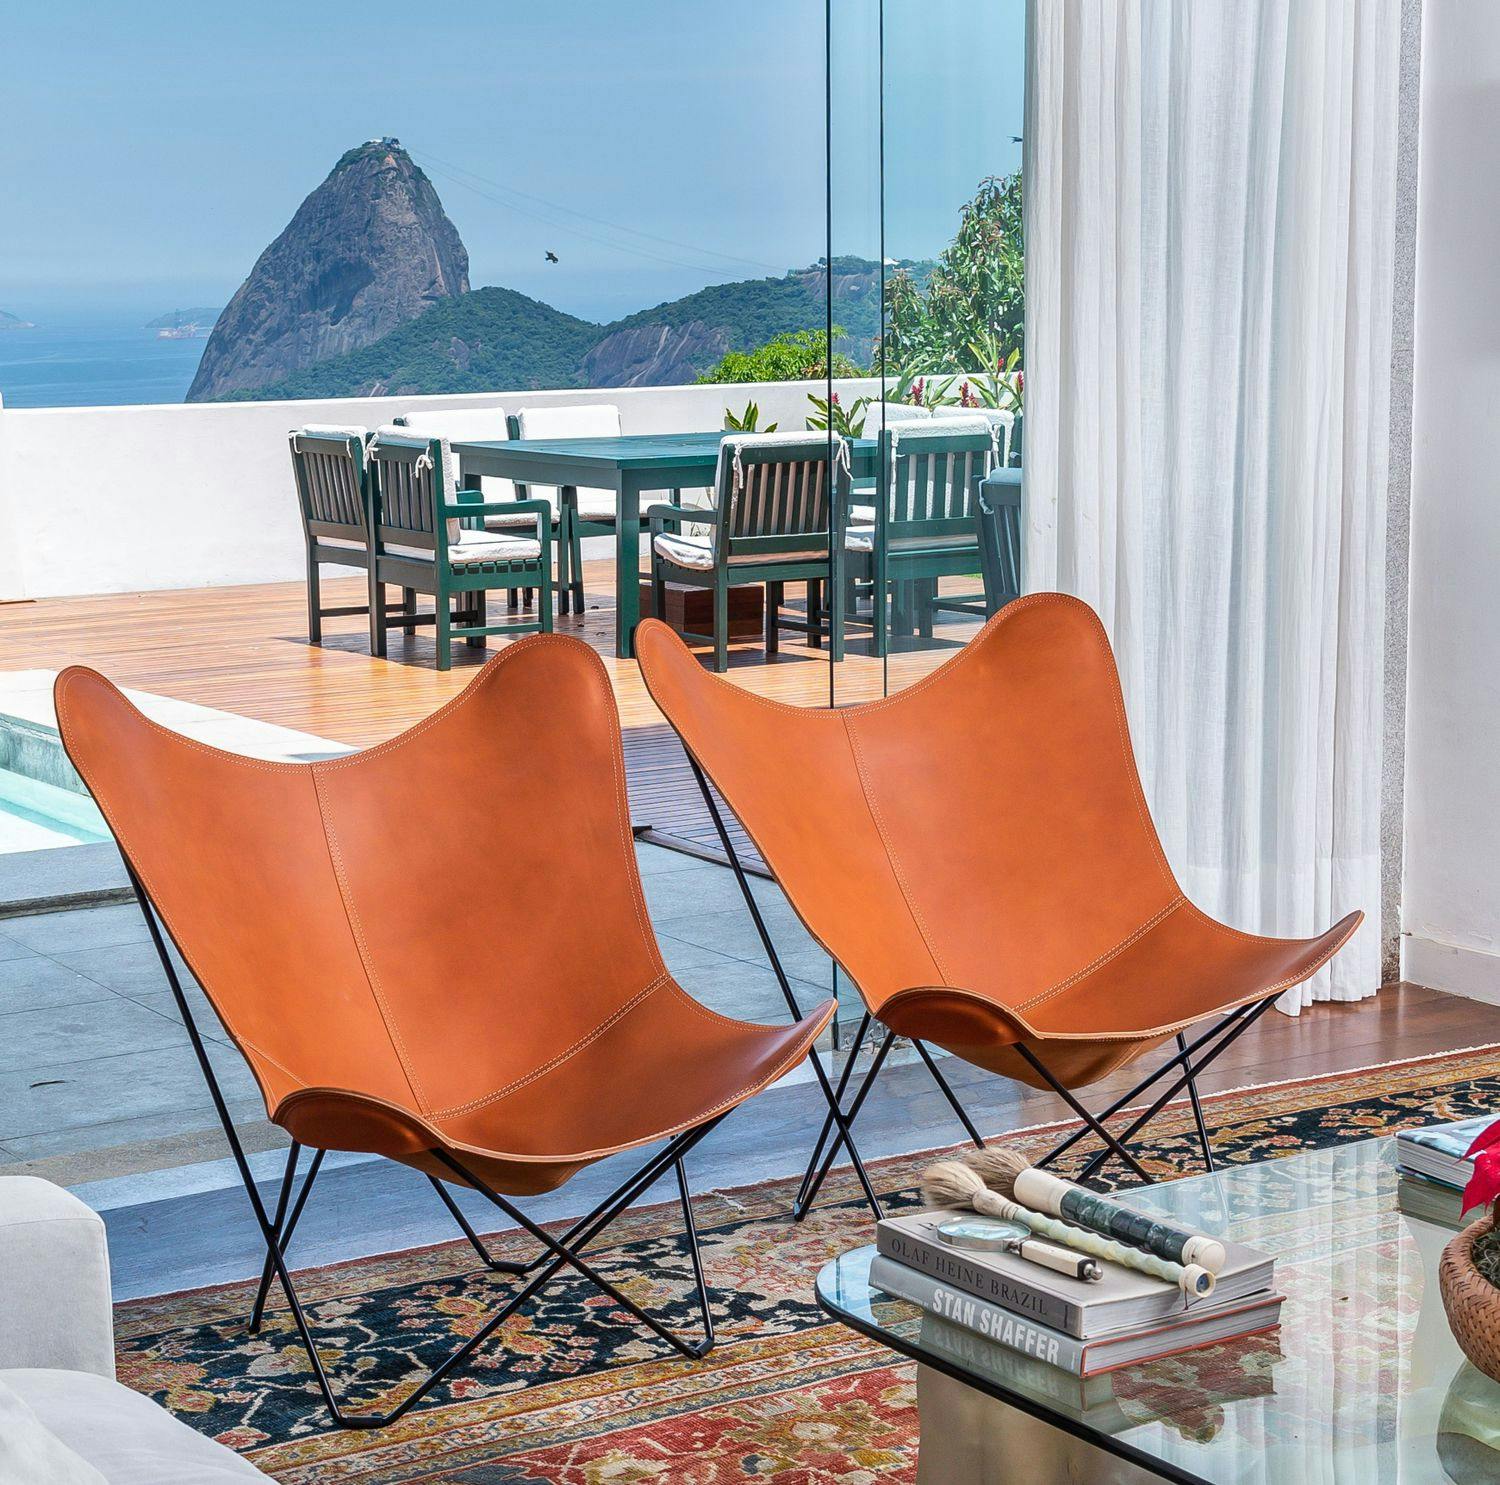 Two luxury butterfly chairs in leather in Rio de Janeiro 5 star boutique hotel